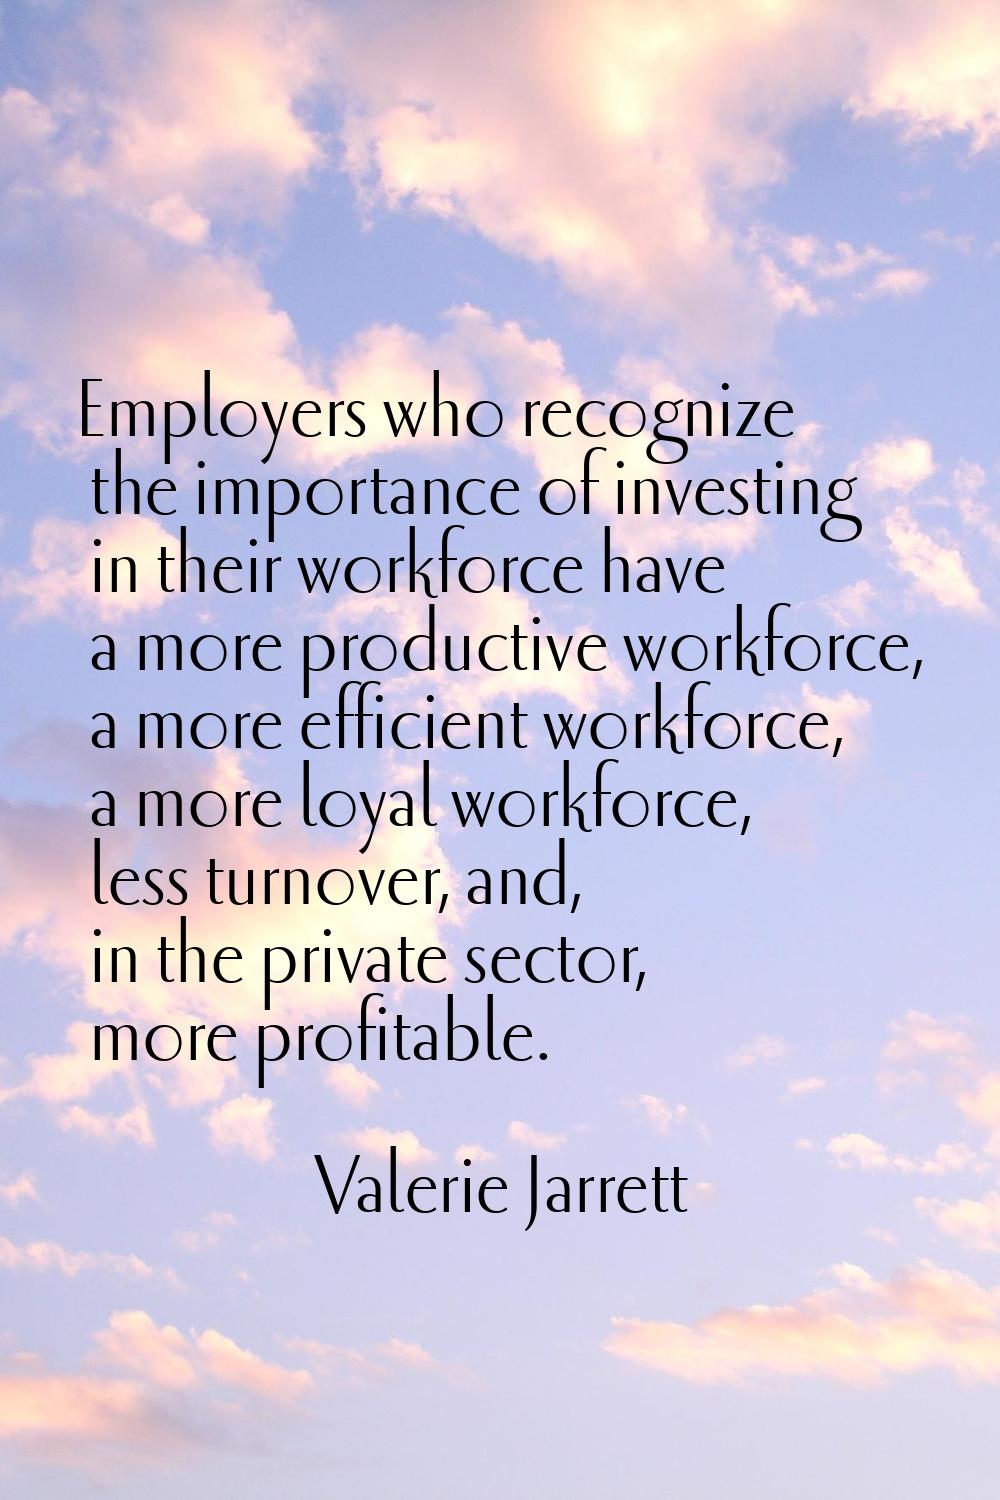 Employers who recognize the importance of investing in their workforce have a more productive workf